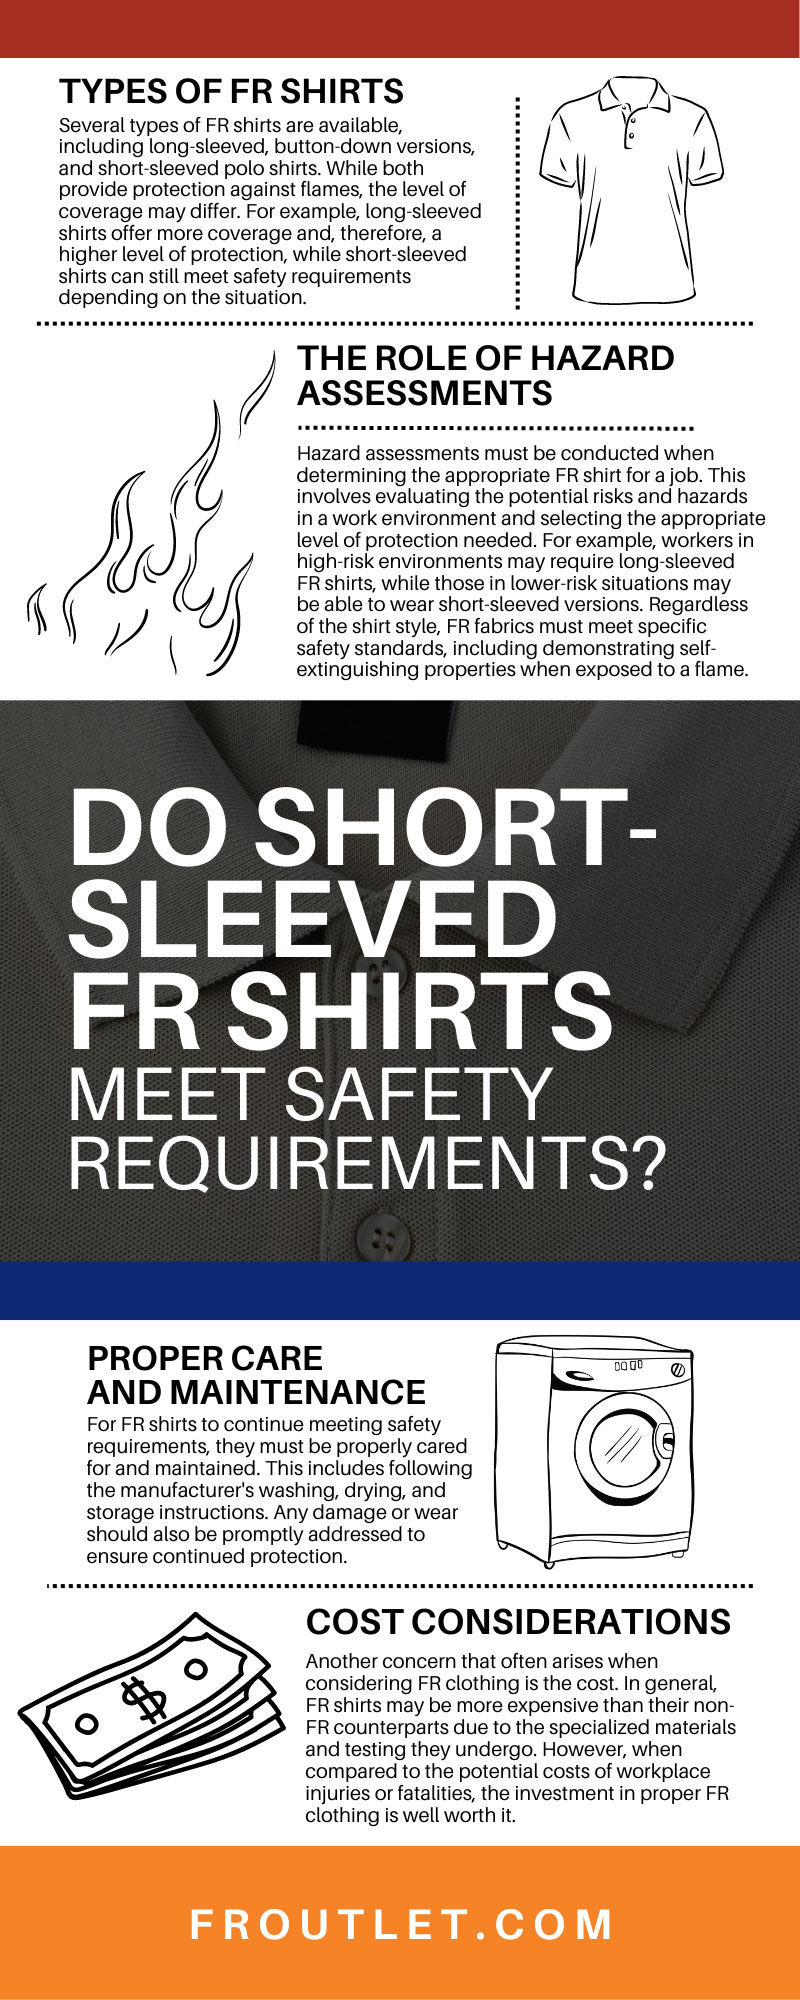 Do Short-Sleeved FR Shirts Meet Safety Requirements?